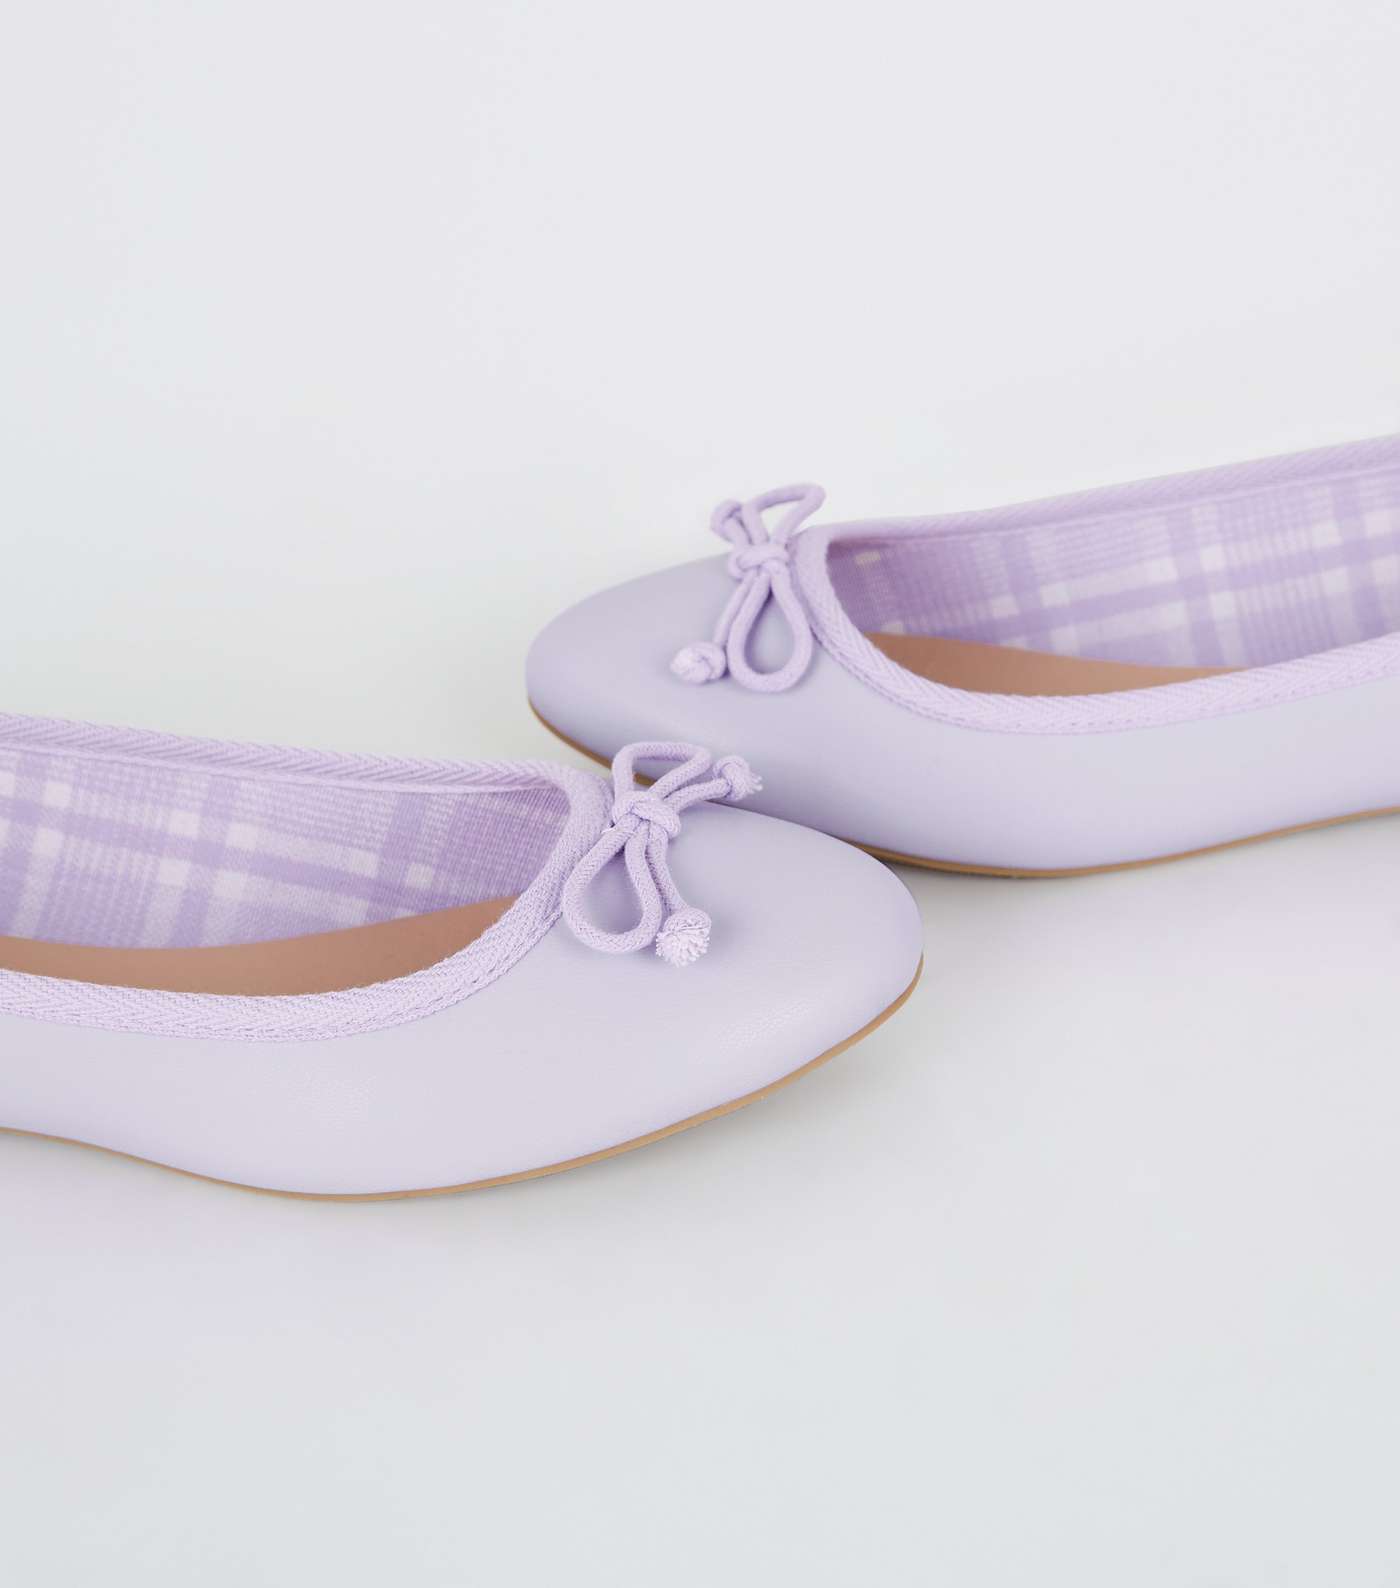 Lilac Leather-Look Check Lined Ballet Pumps Image 3